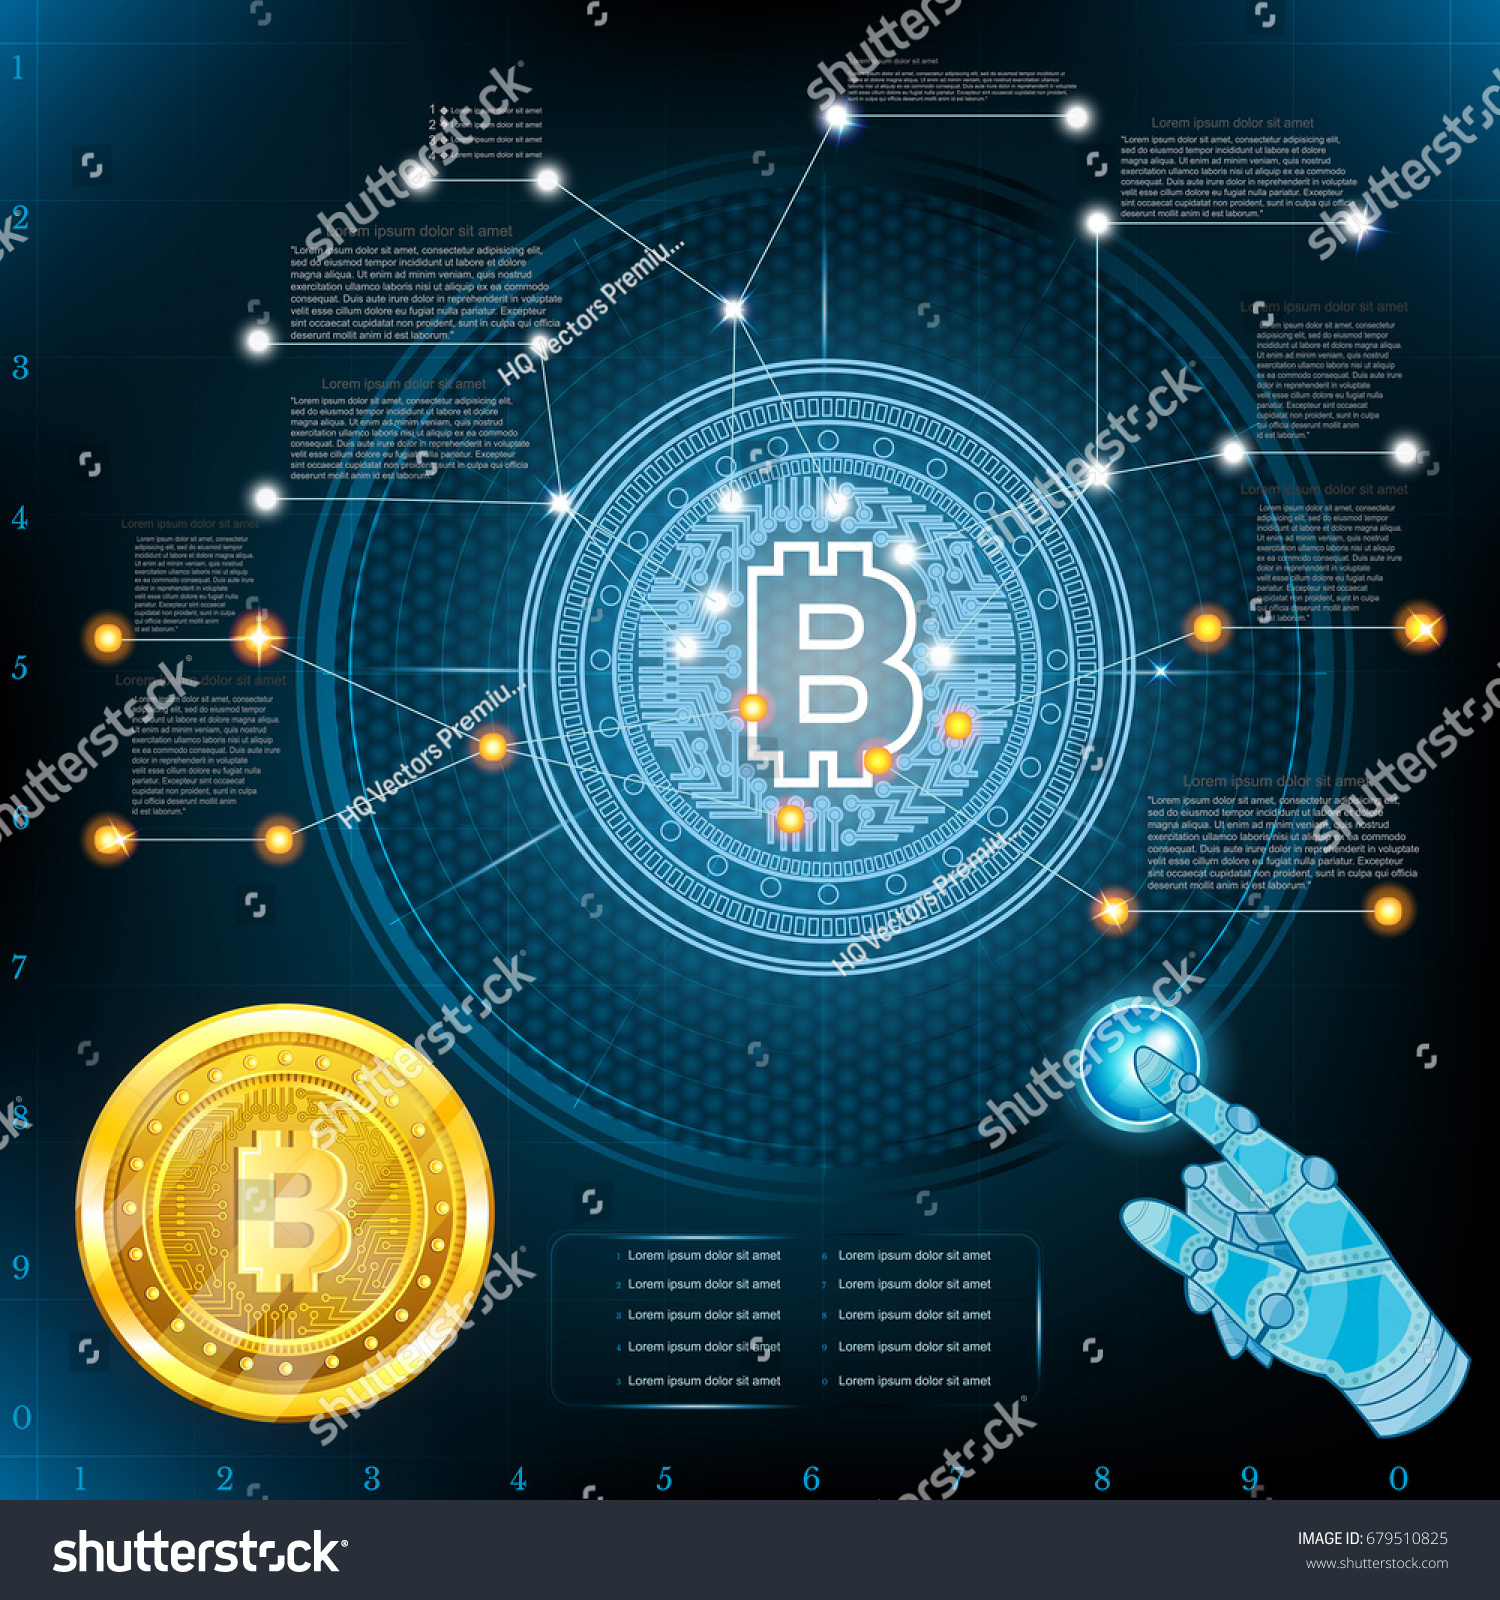 SVG of Virtual high tech screen or graphic with golden bit coin in center. Business info graphic svg